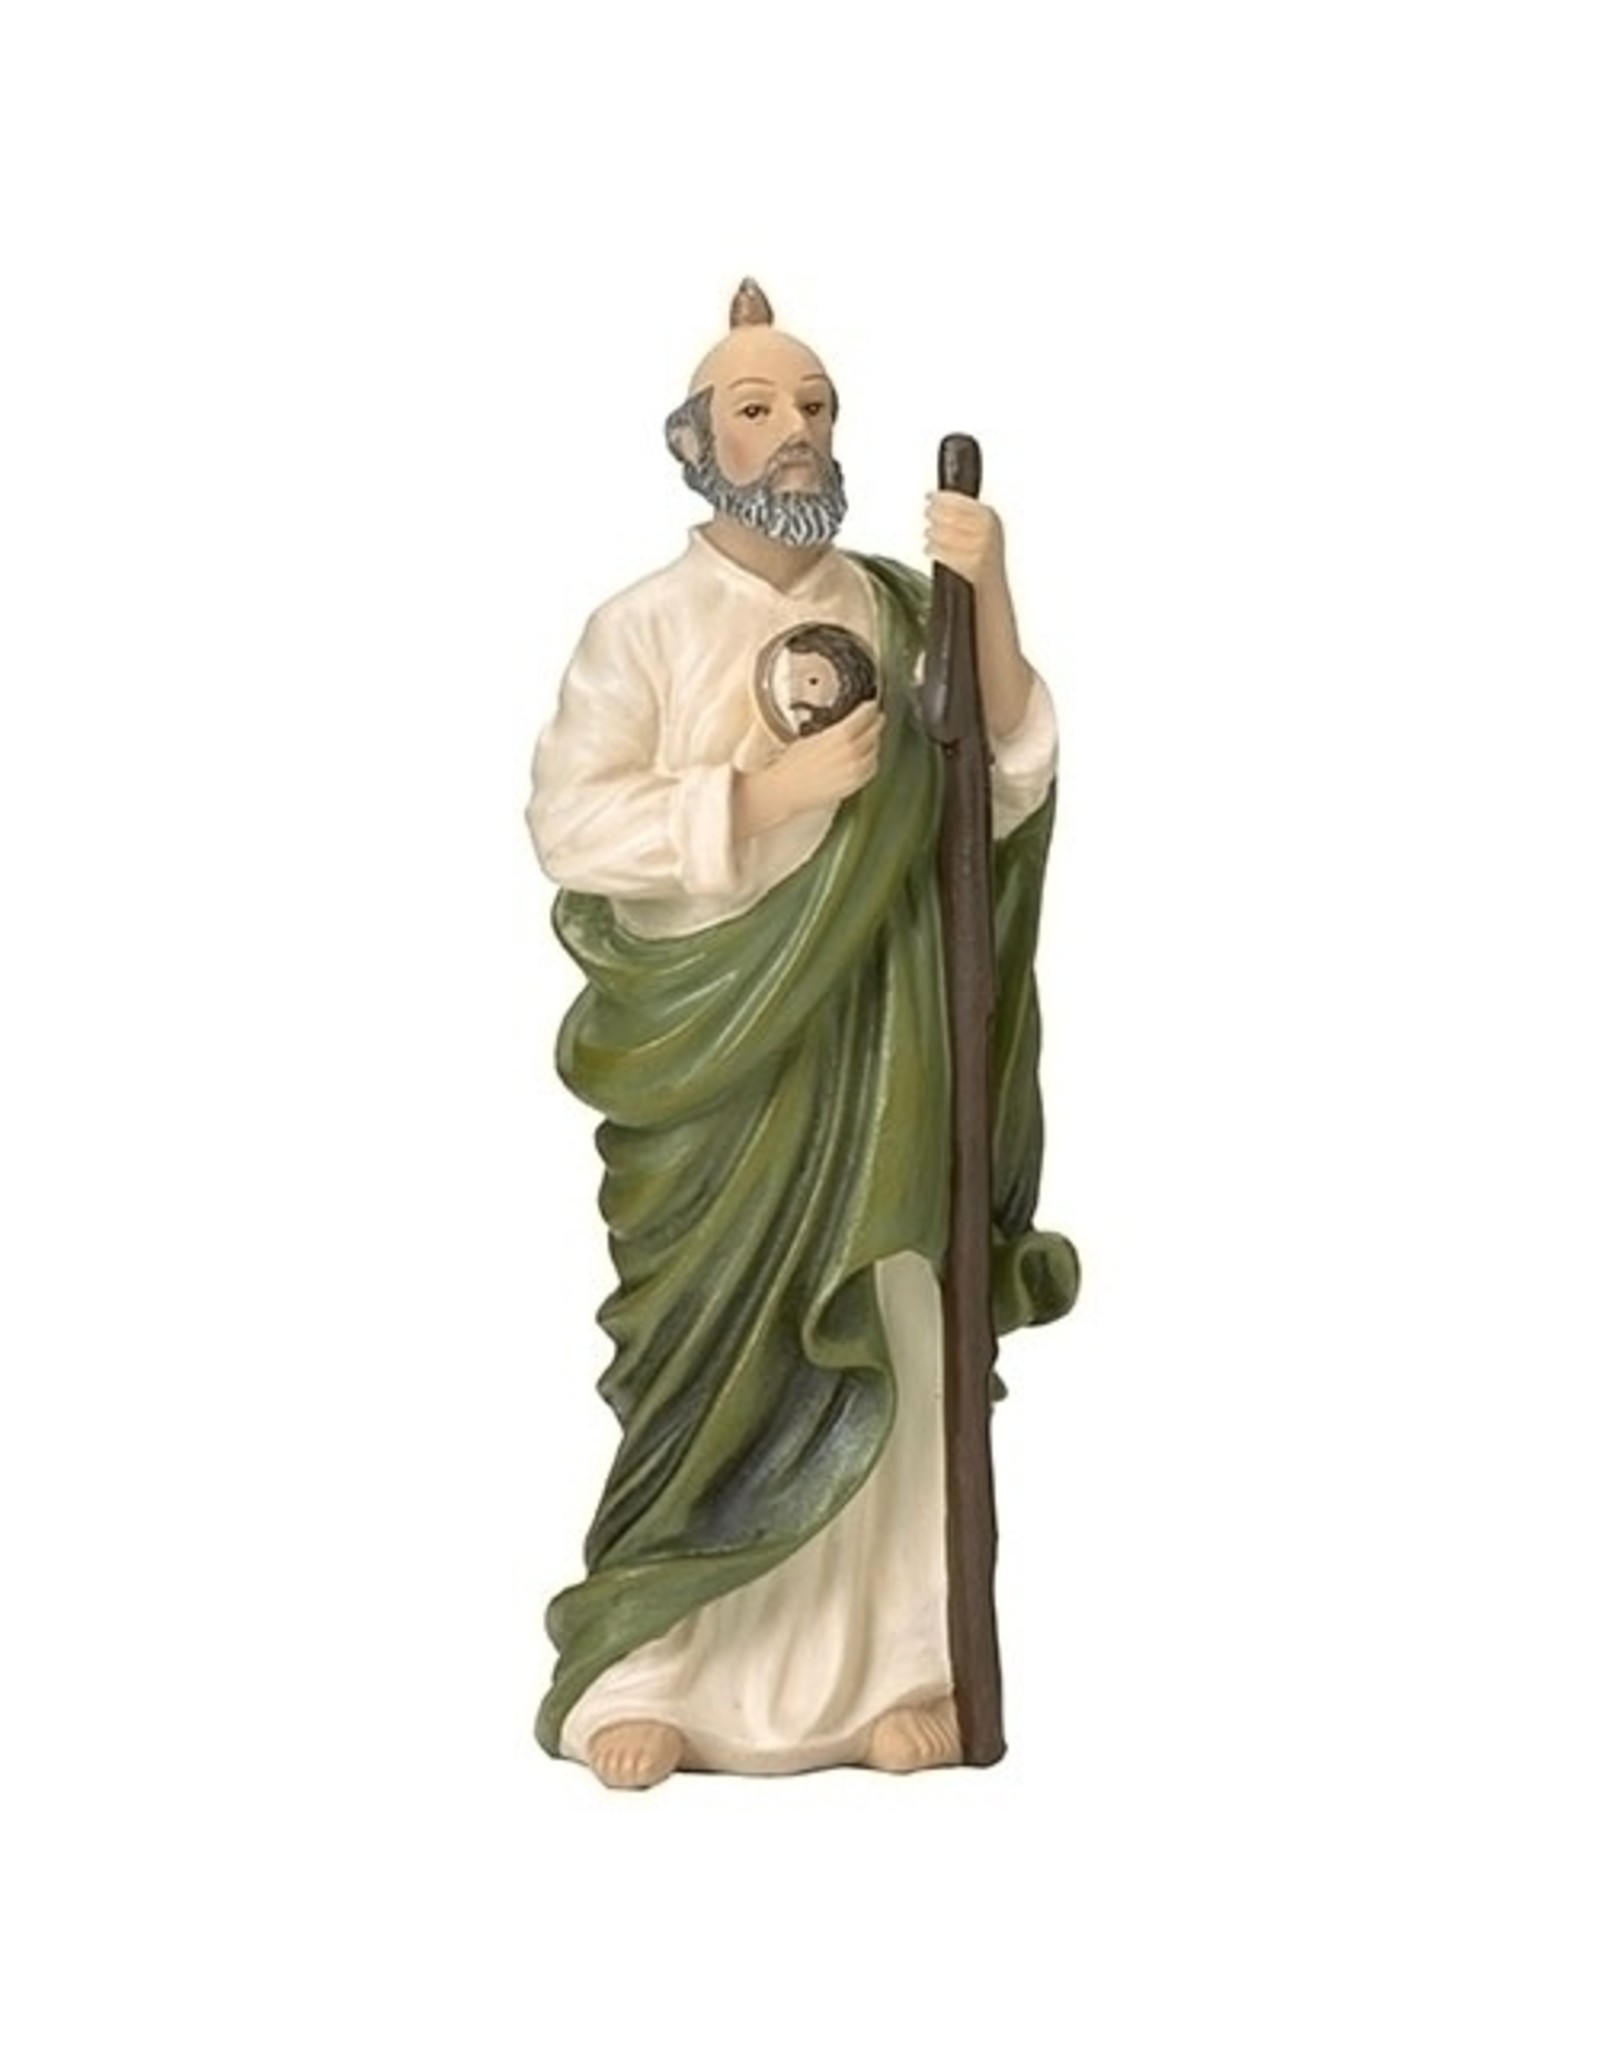 Roman St. Jude Statue (Patrons and Protectors), 4"